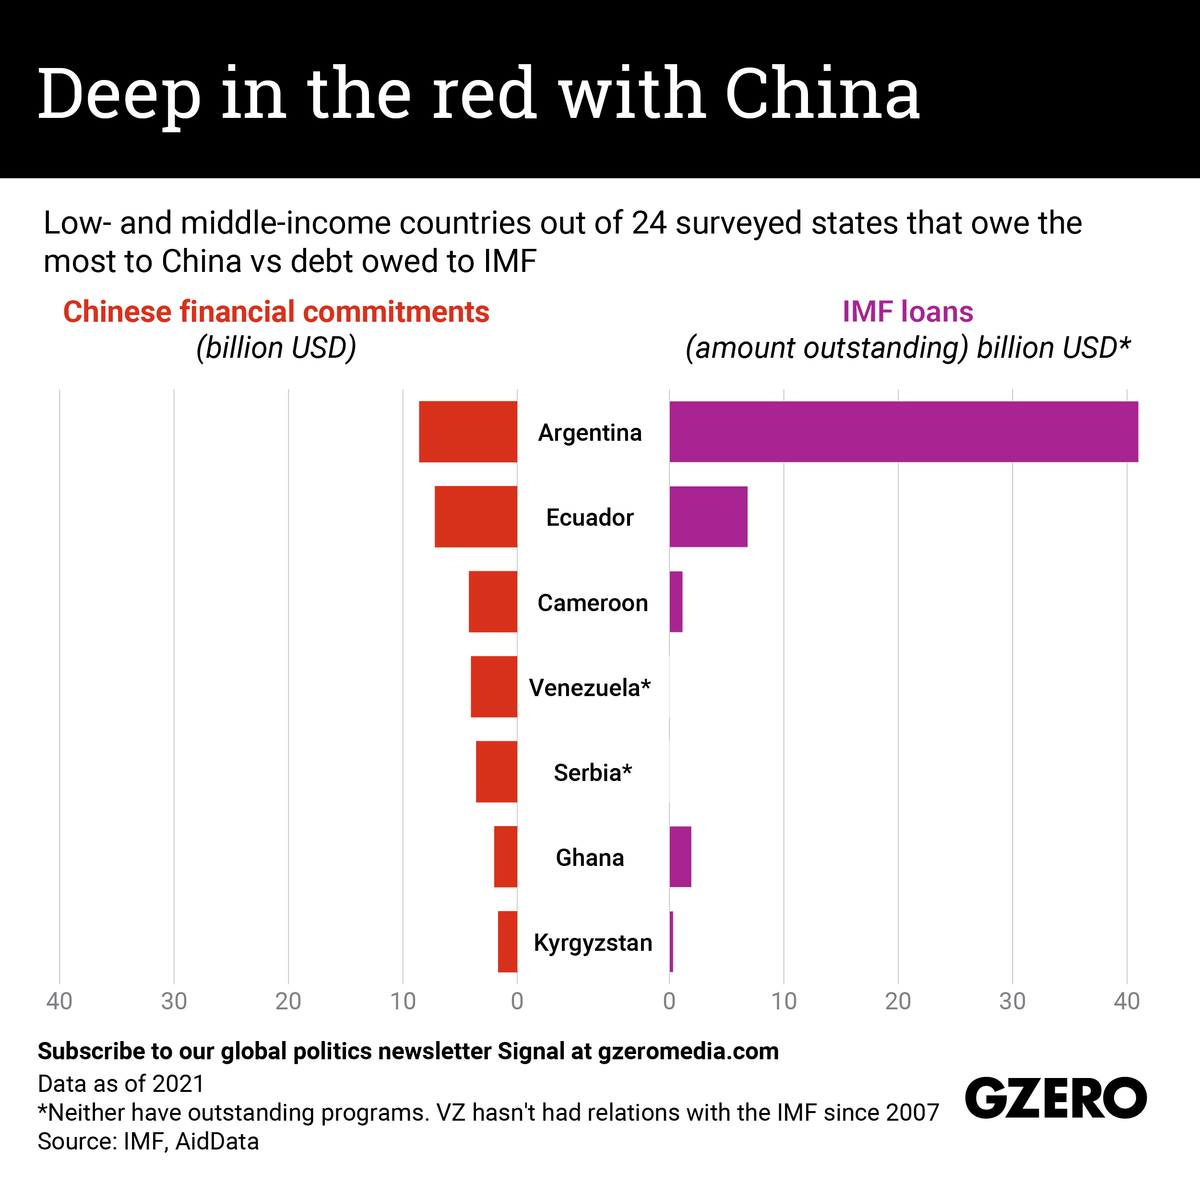 Deep in the red with China